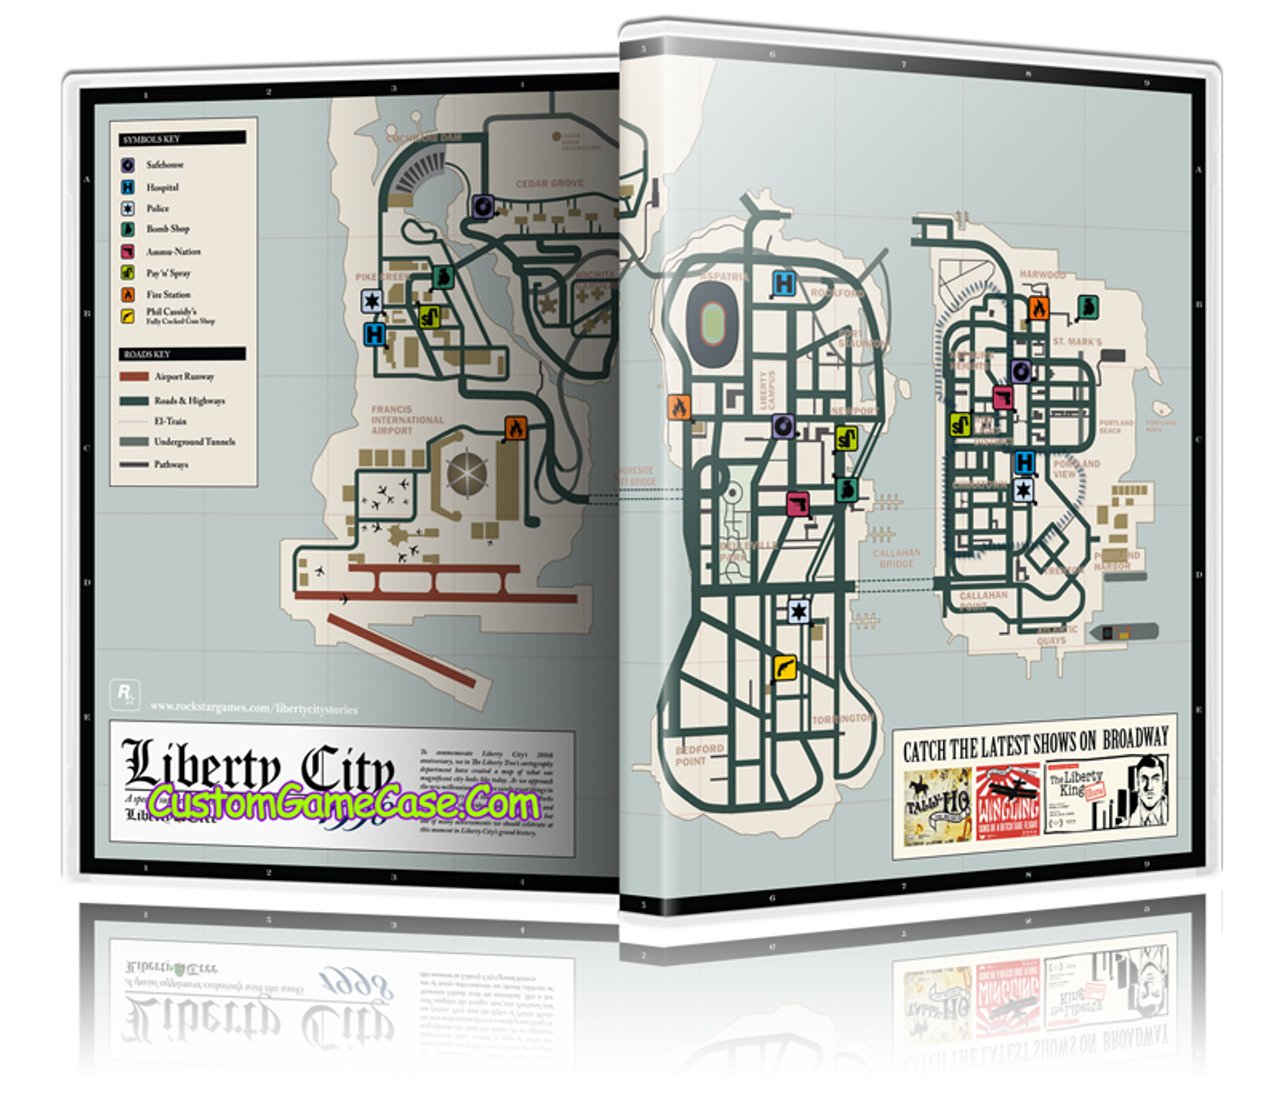 Grand Theft Auto GTA Liberty City Stories Sony PSP COMPLETE Map/Manual  TESTED 827307930065